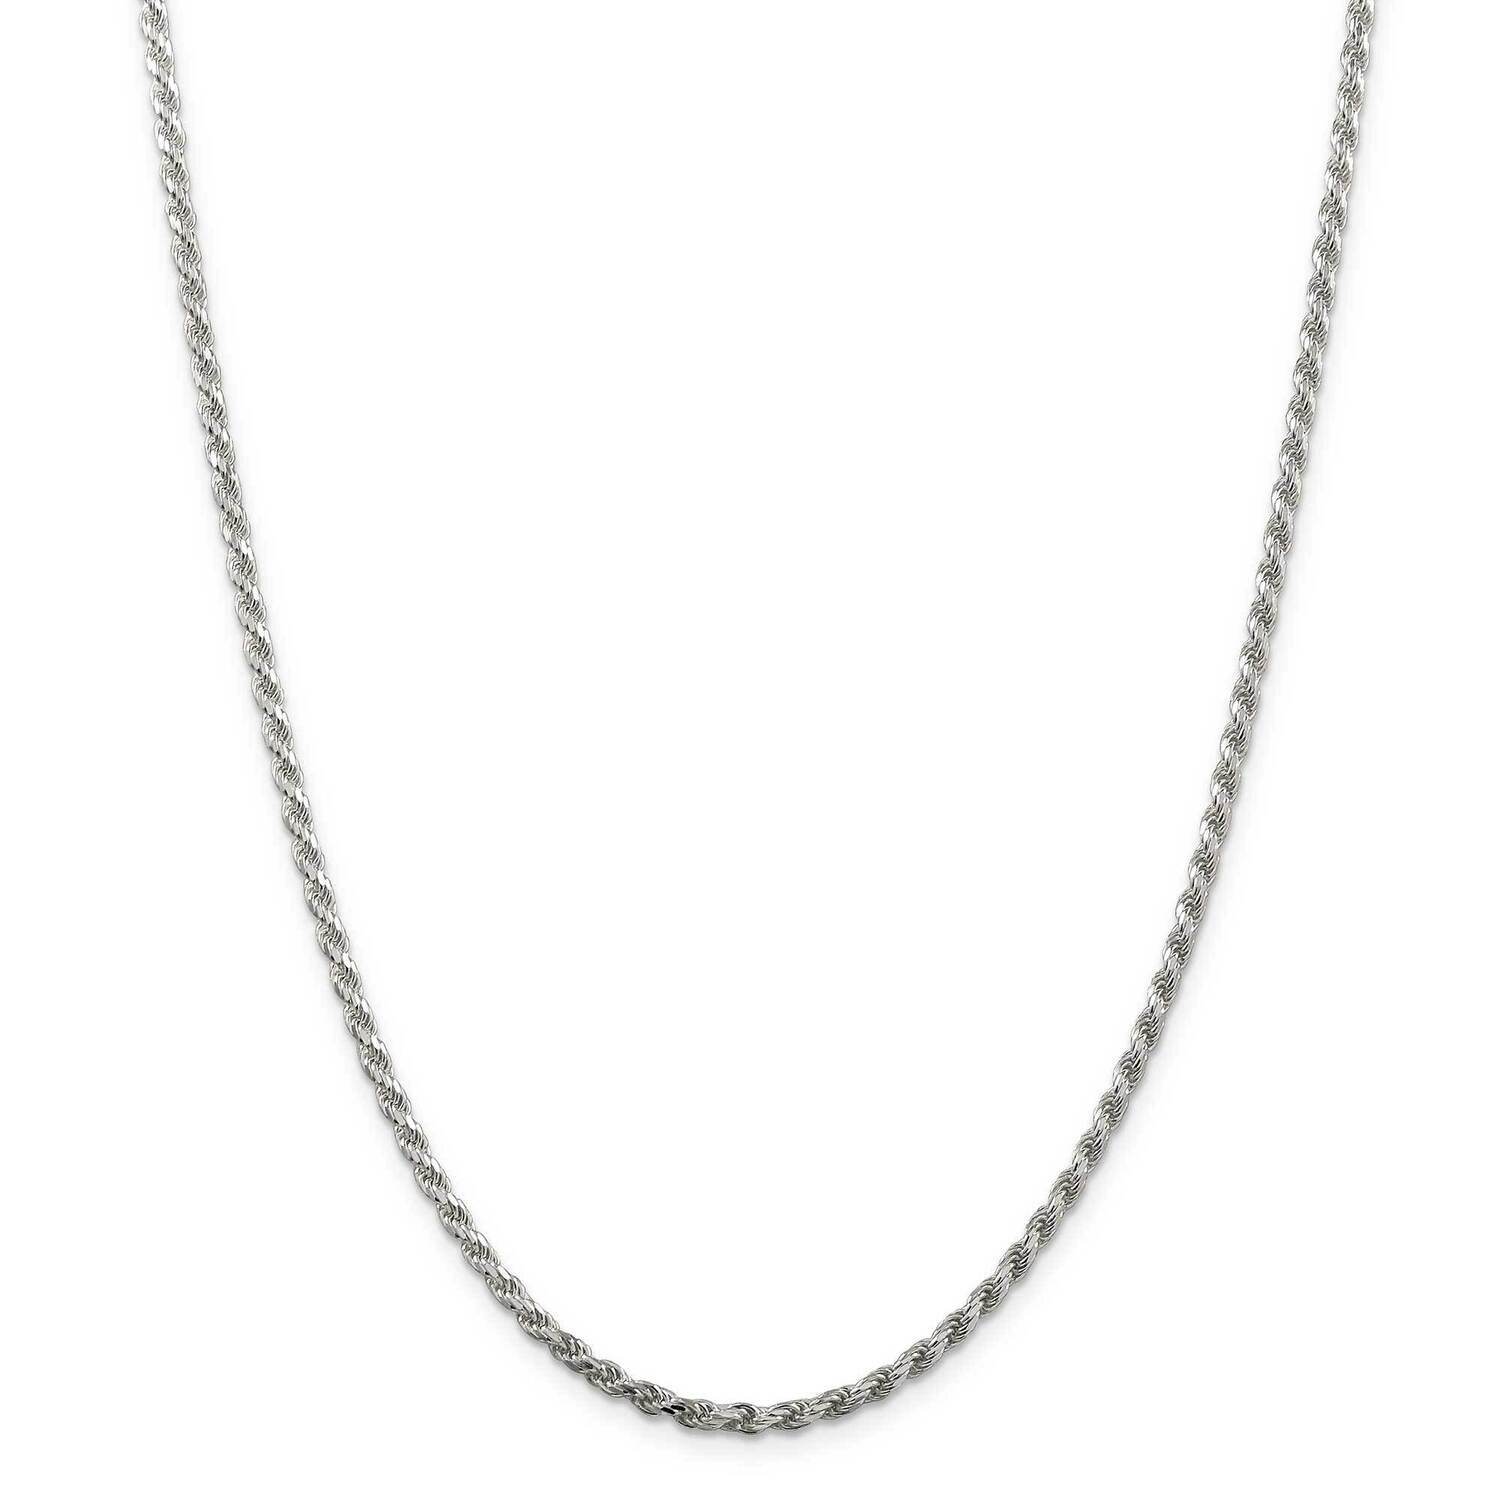 2.75mm Diamond-Cut Rope Chain with 4 Inch Extender 22 Inch Sterling Silver QDC060E-22